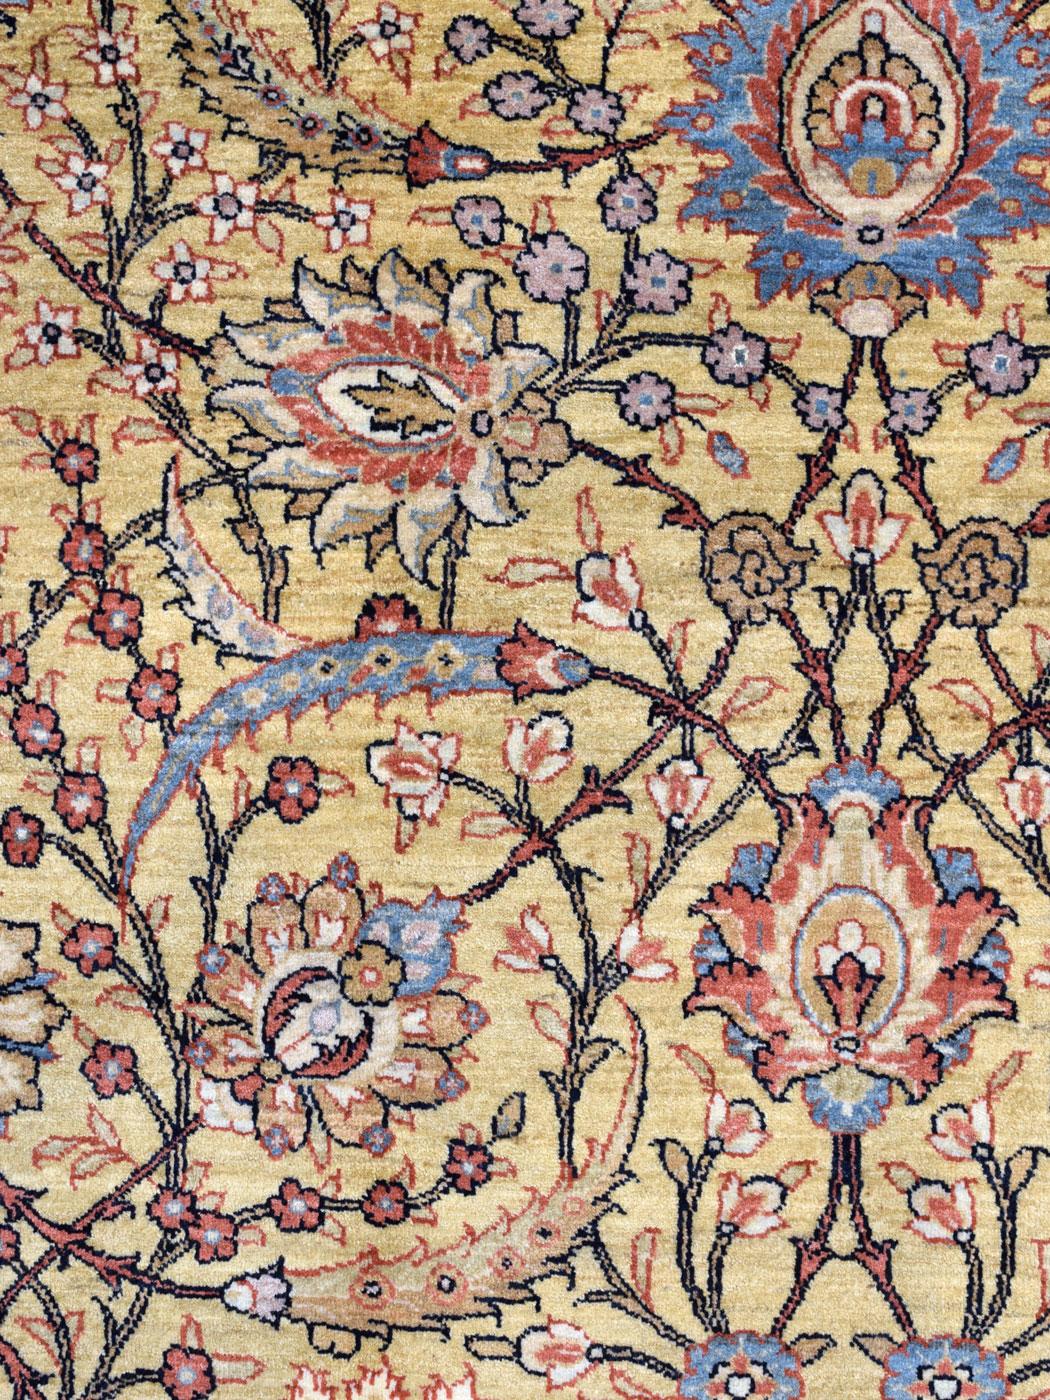 Pure Wool Mohtasham Persian Carpet, Cream, Red, and Blue, 5' x 7' For Sale 5